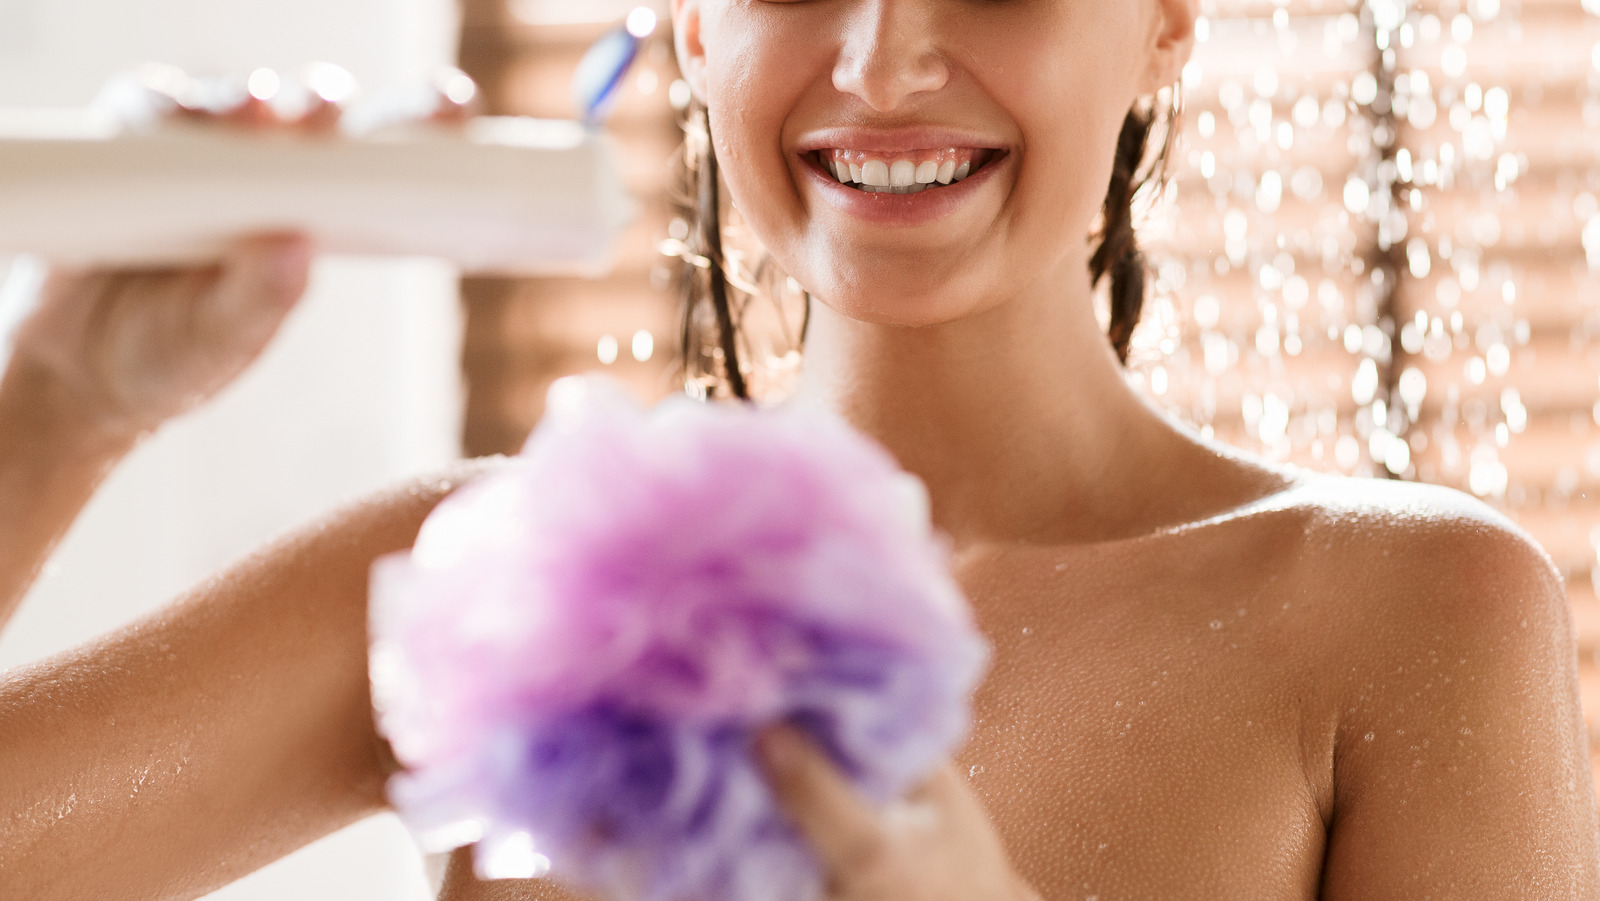 The Best-Smelling Body Washes for Women